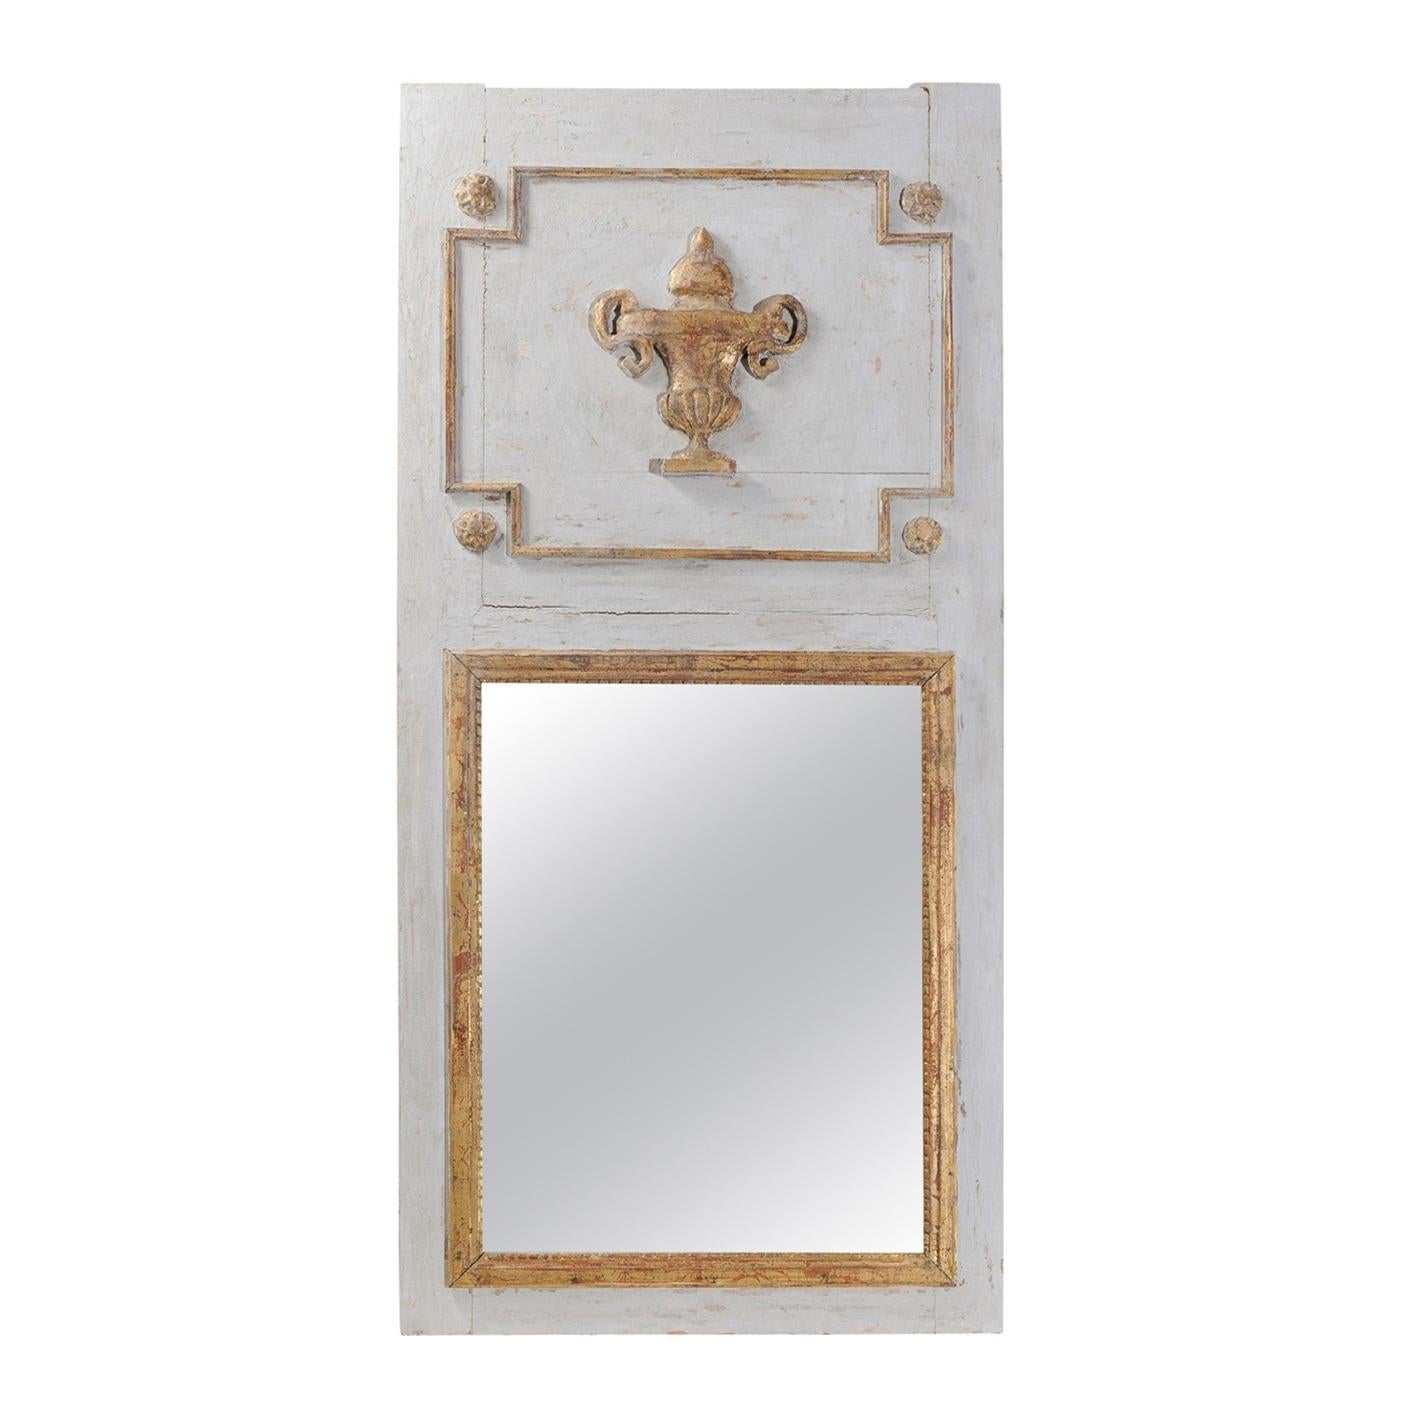 French 19th Century Painted Trumeau Mirror with Giltwood Vase and Mercury Glass